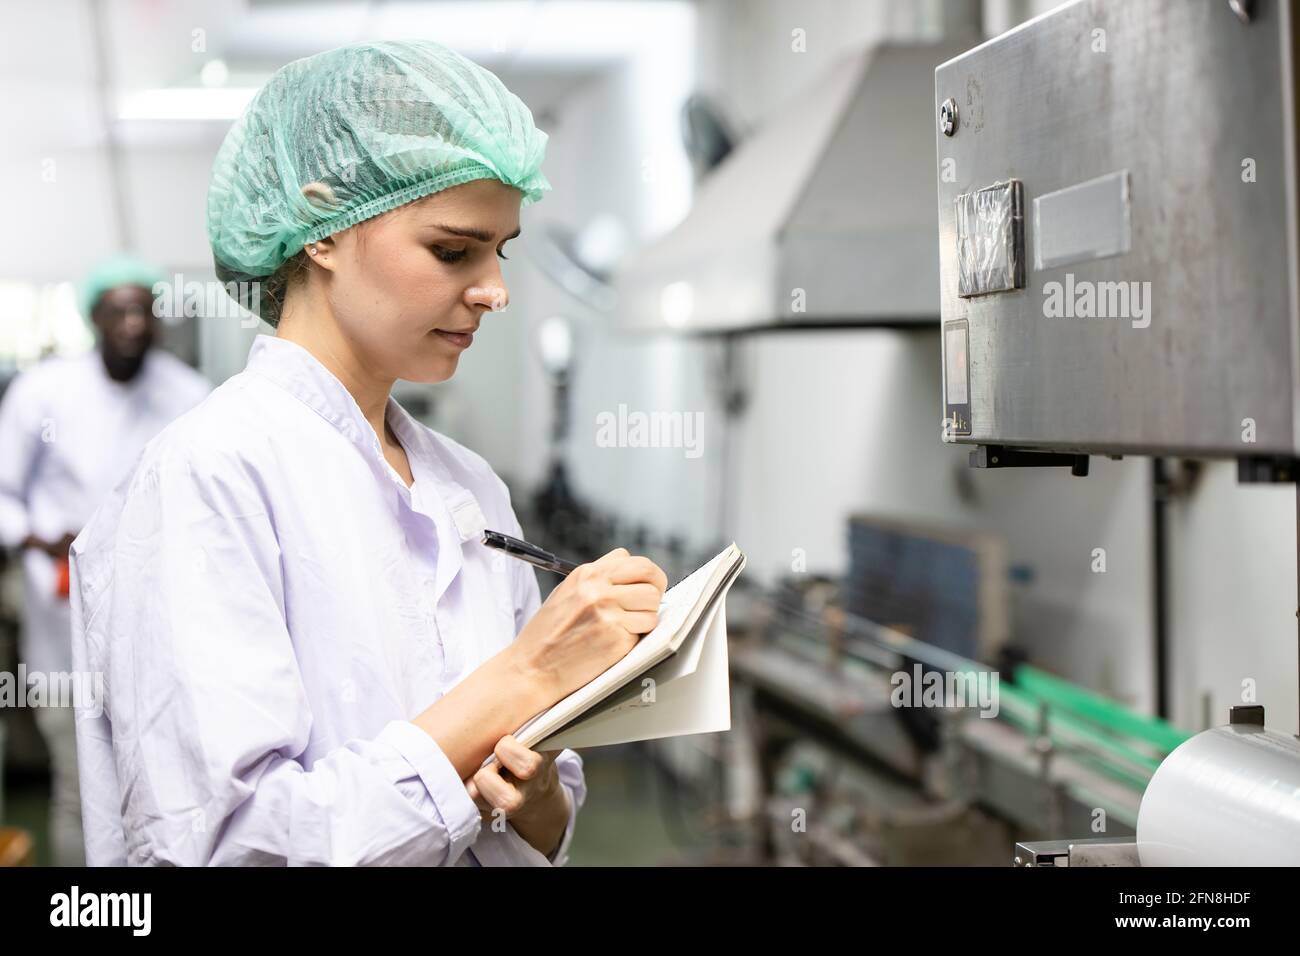 Quality control and food safety caucasian women worker staff inspection the product standard in the food and drink factory production line. Stock Photo